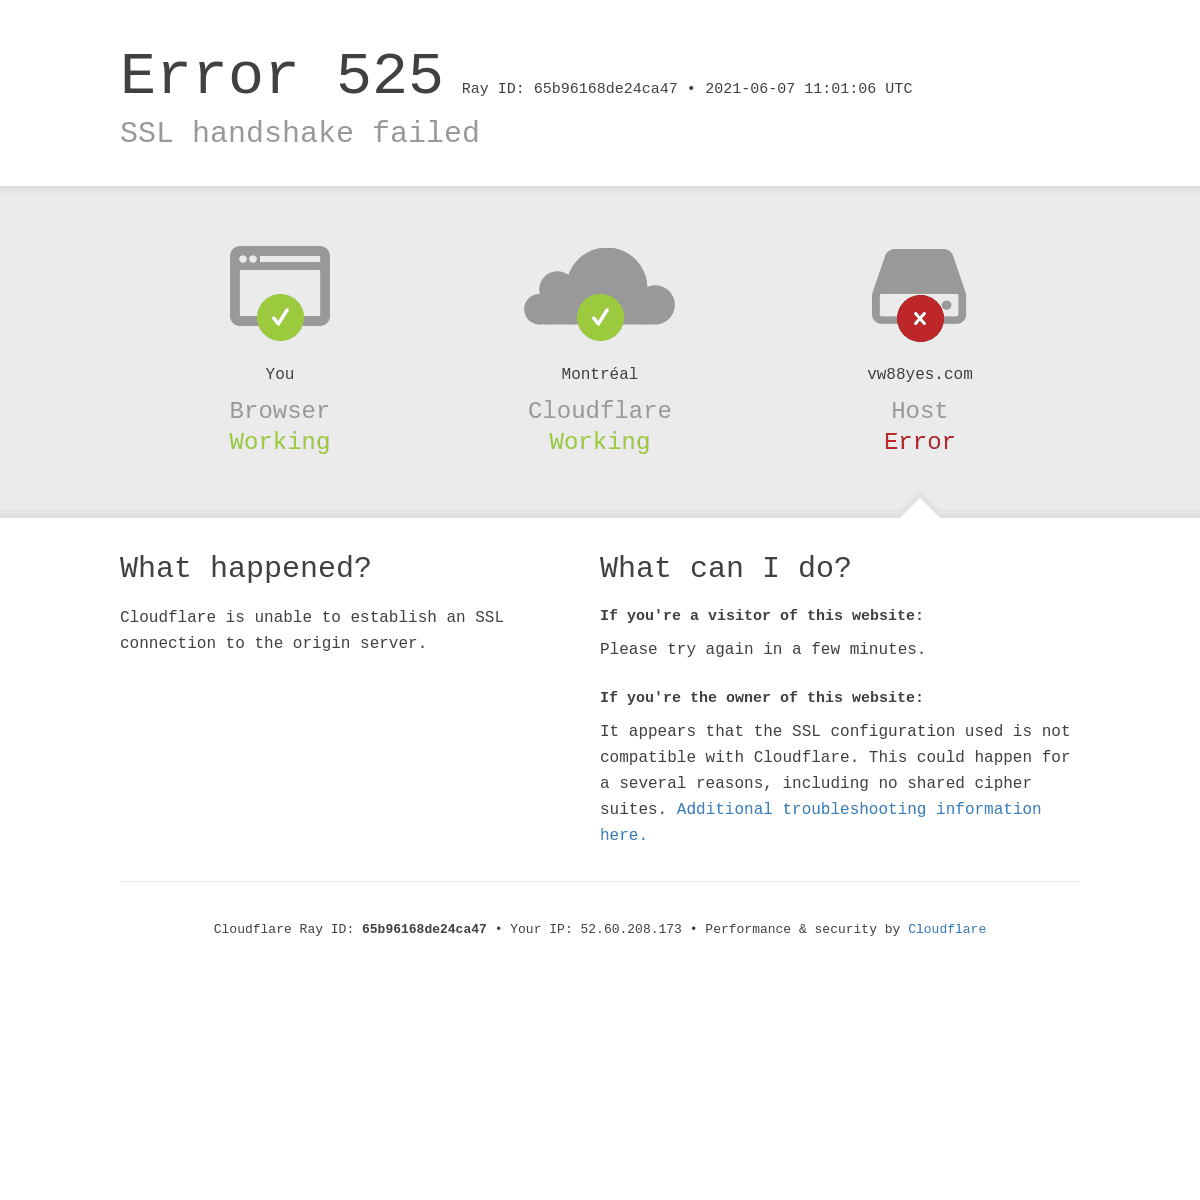 A complete backup of https://vw88yes.com